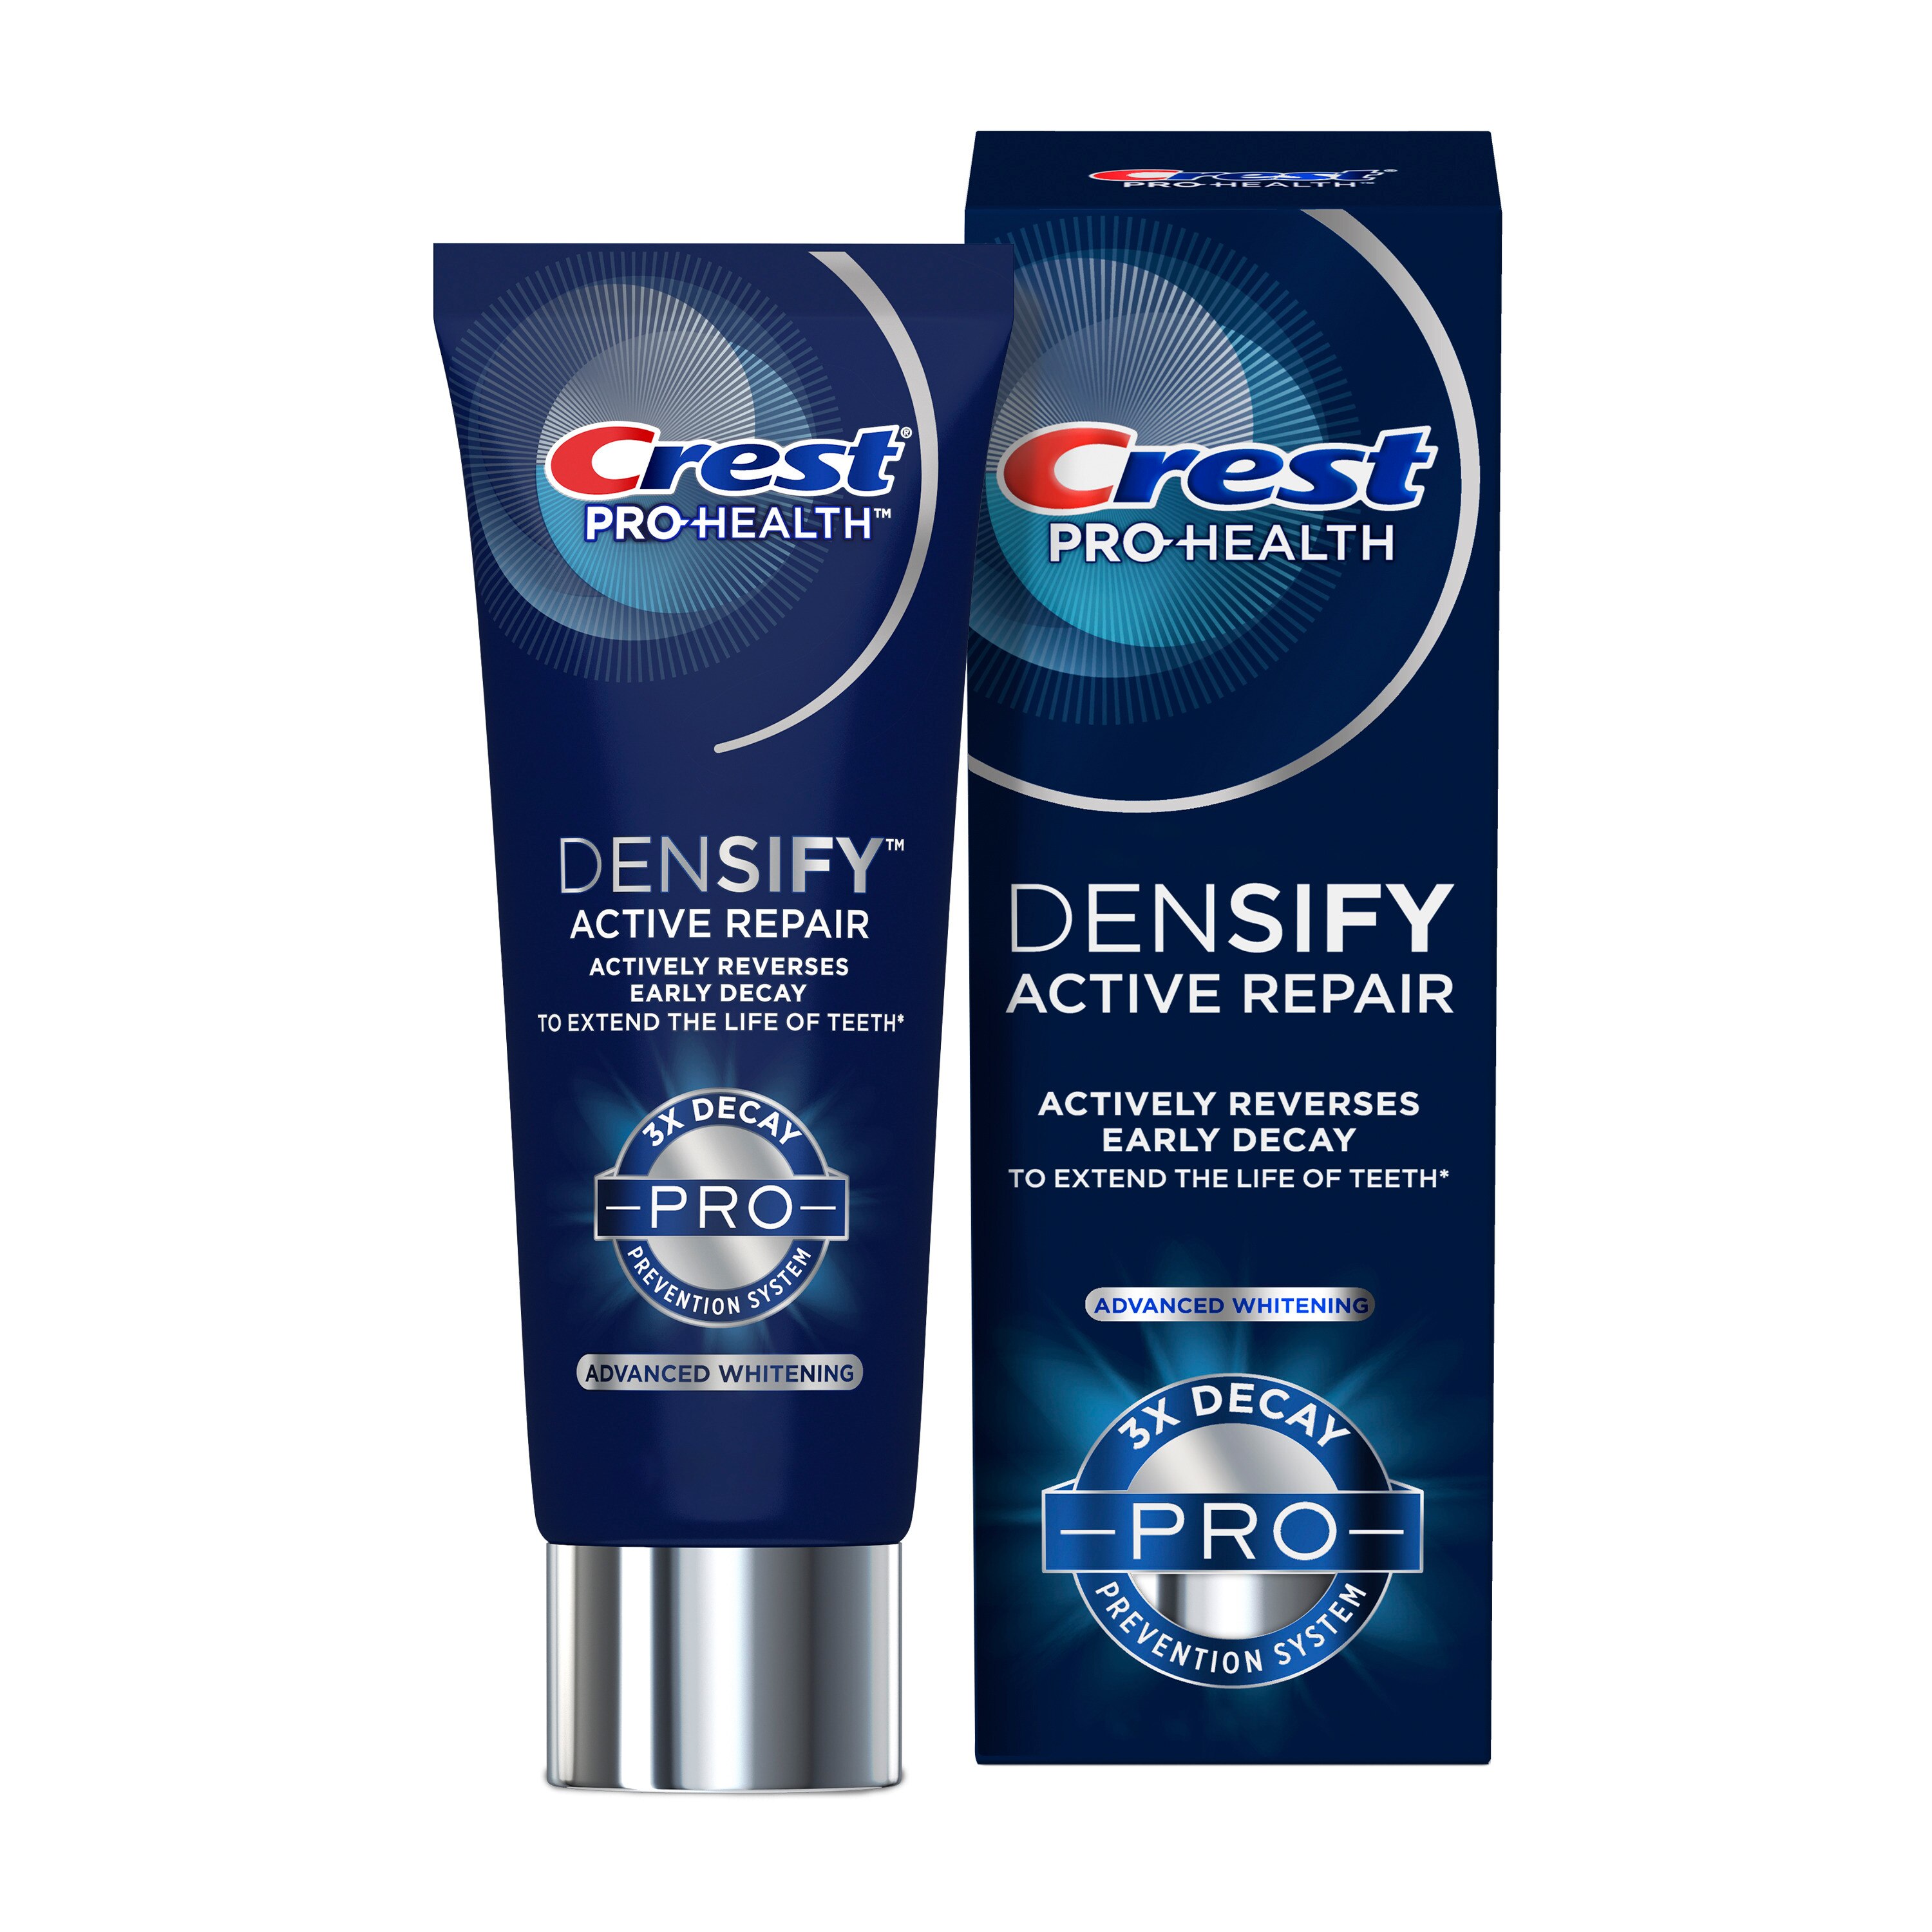 Crest Pro-Health Densify Active Repair Fluoride Toothpaste For Anticavity And Sensitive Teeth, 3x Decay Prevention System, Advanced Whitening, 3.5 Oz